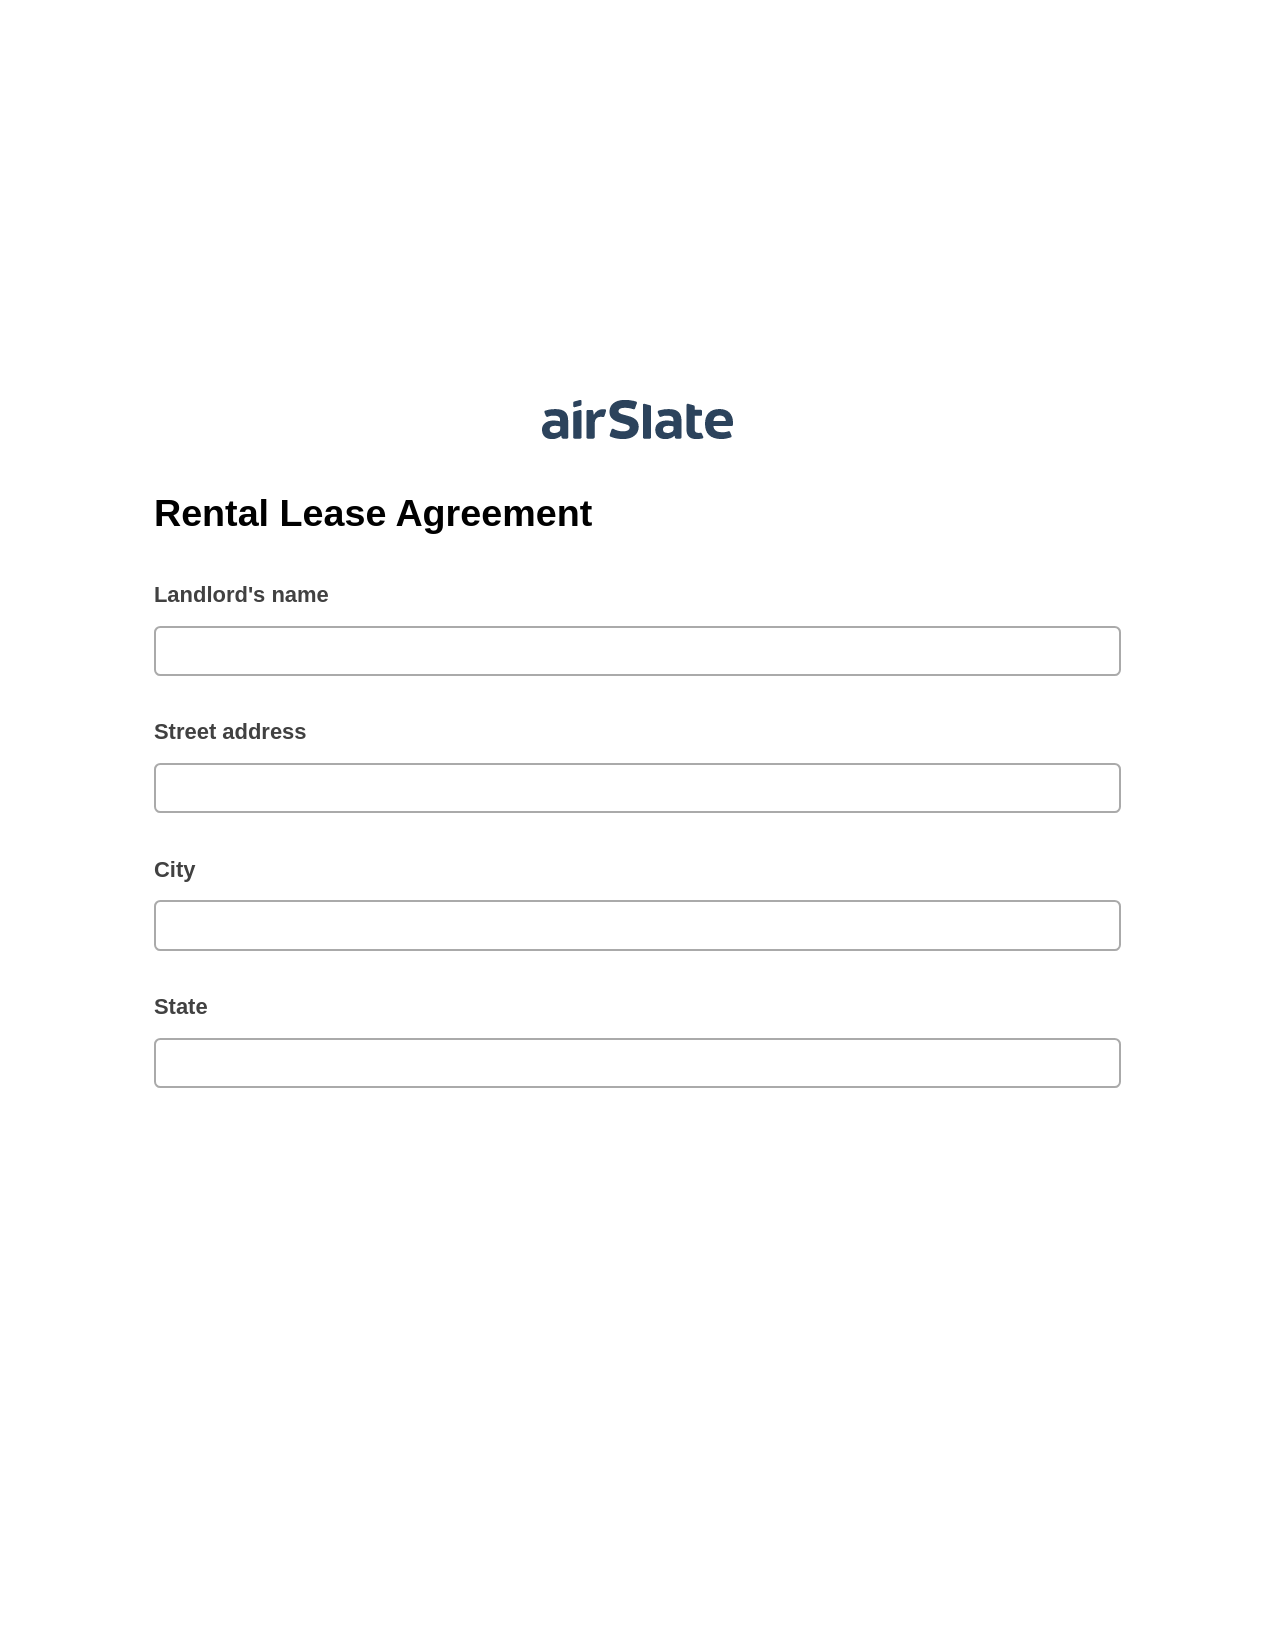 Rental Lease Agreement Pre-fill from Excel Spreadsheet Bot, SendGrid send Campaign bot, Post-finish Document Bot